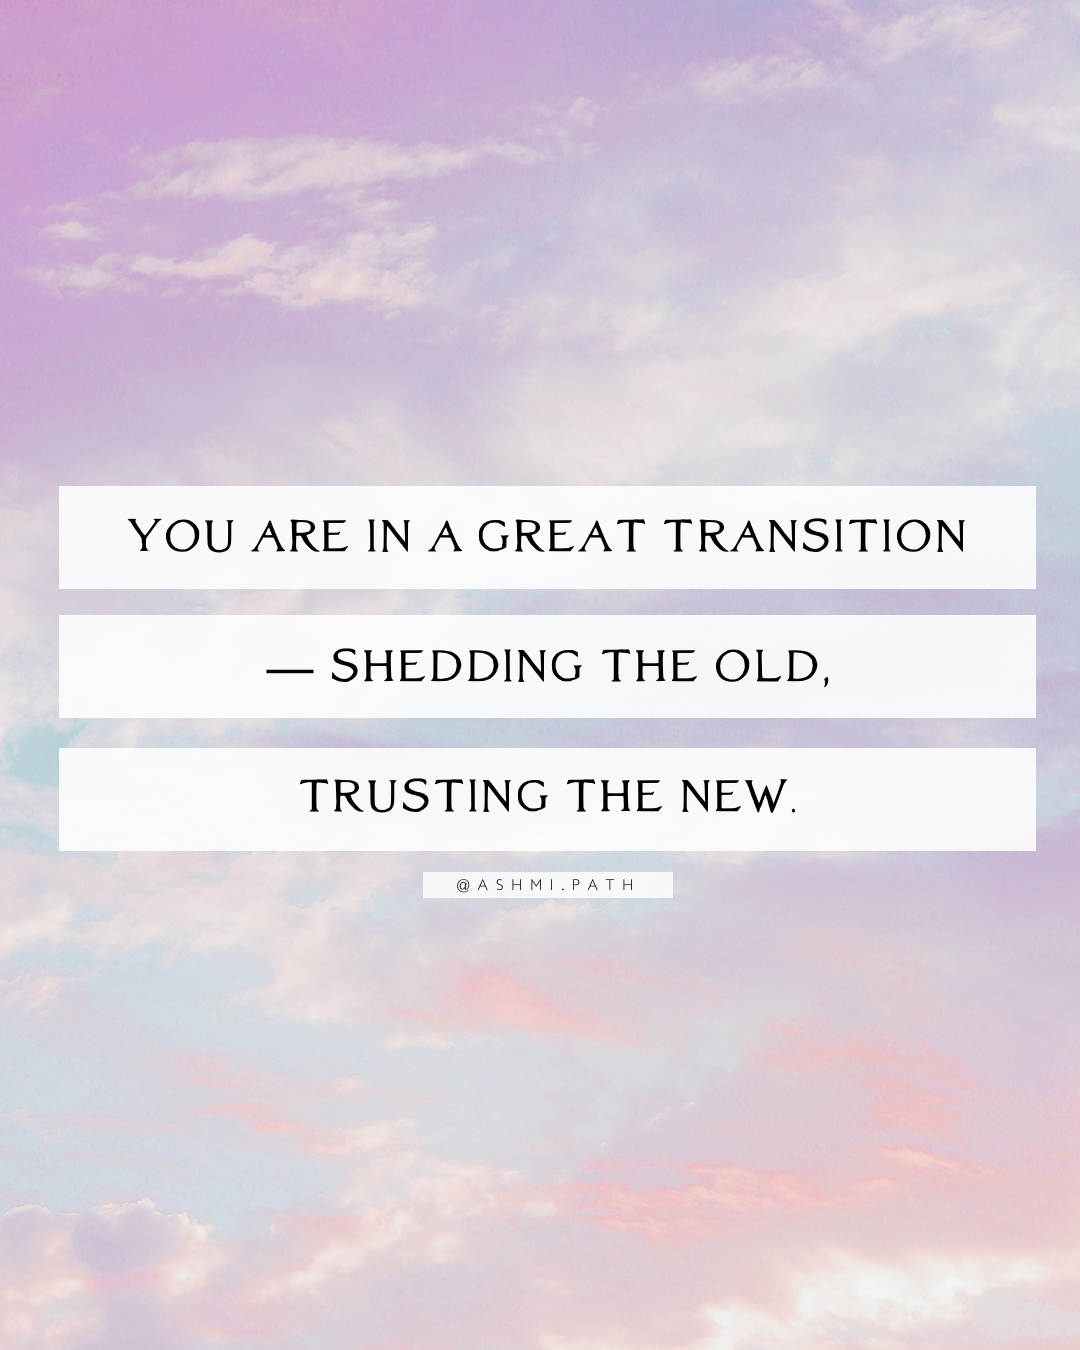 Shedding the Old, Trusting the New